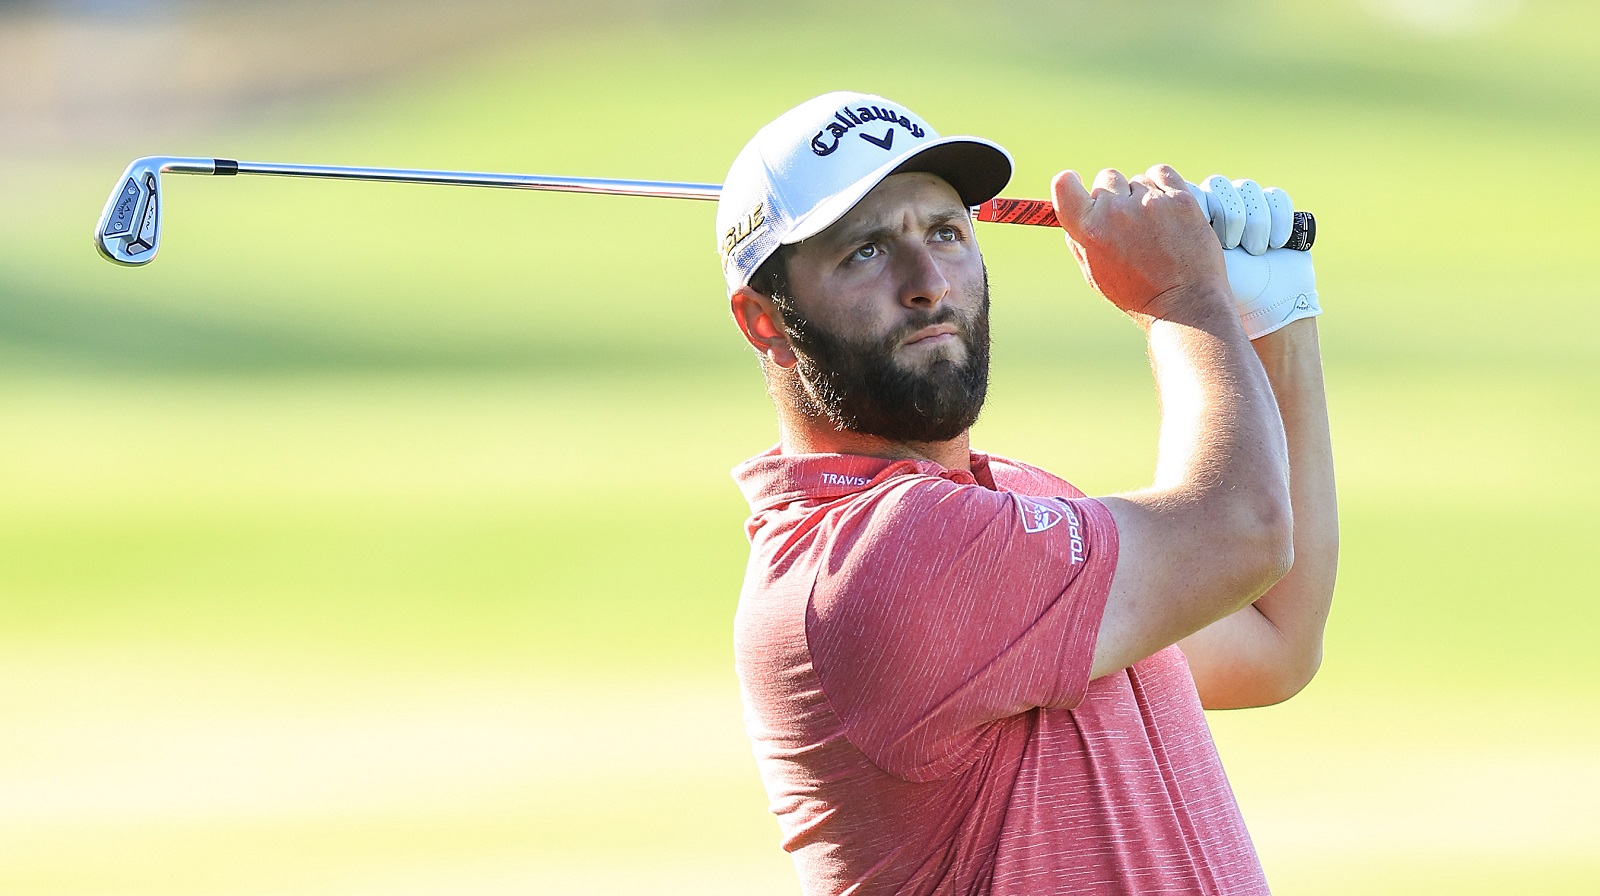 Jon Rahm Wouldn’t Risk Marital Bliss on a Masters Bet With an Ex-NFL Quarterback